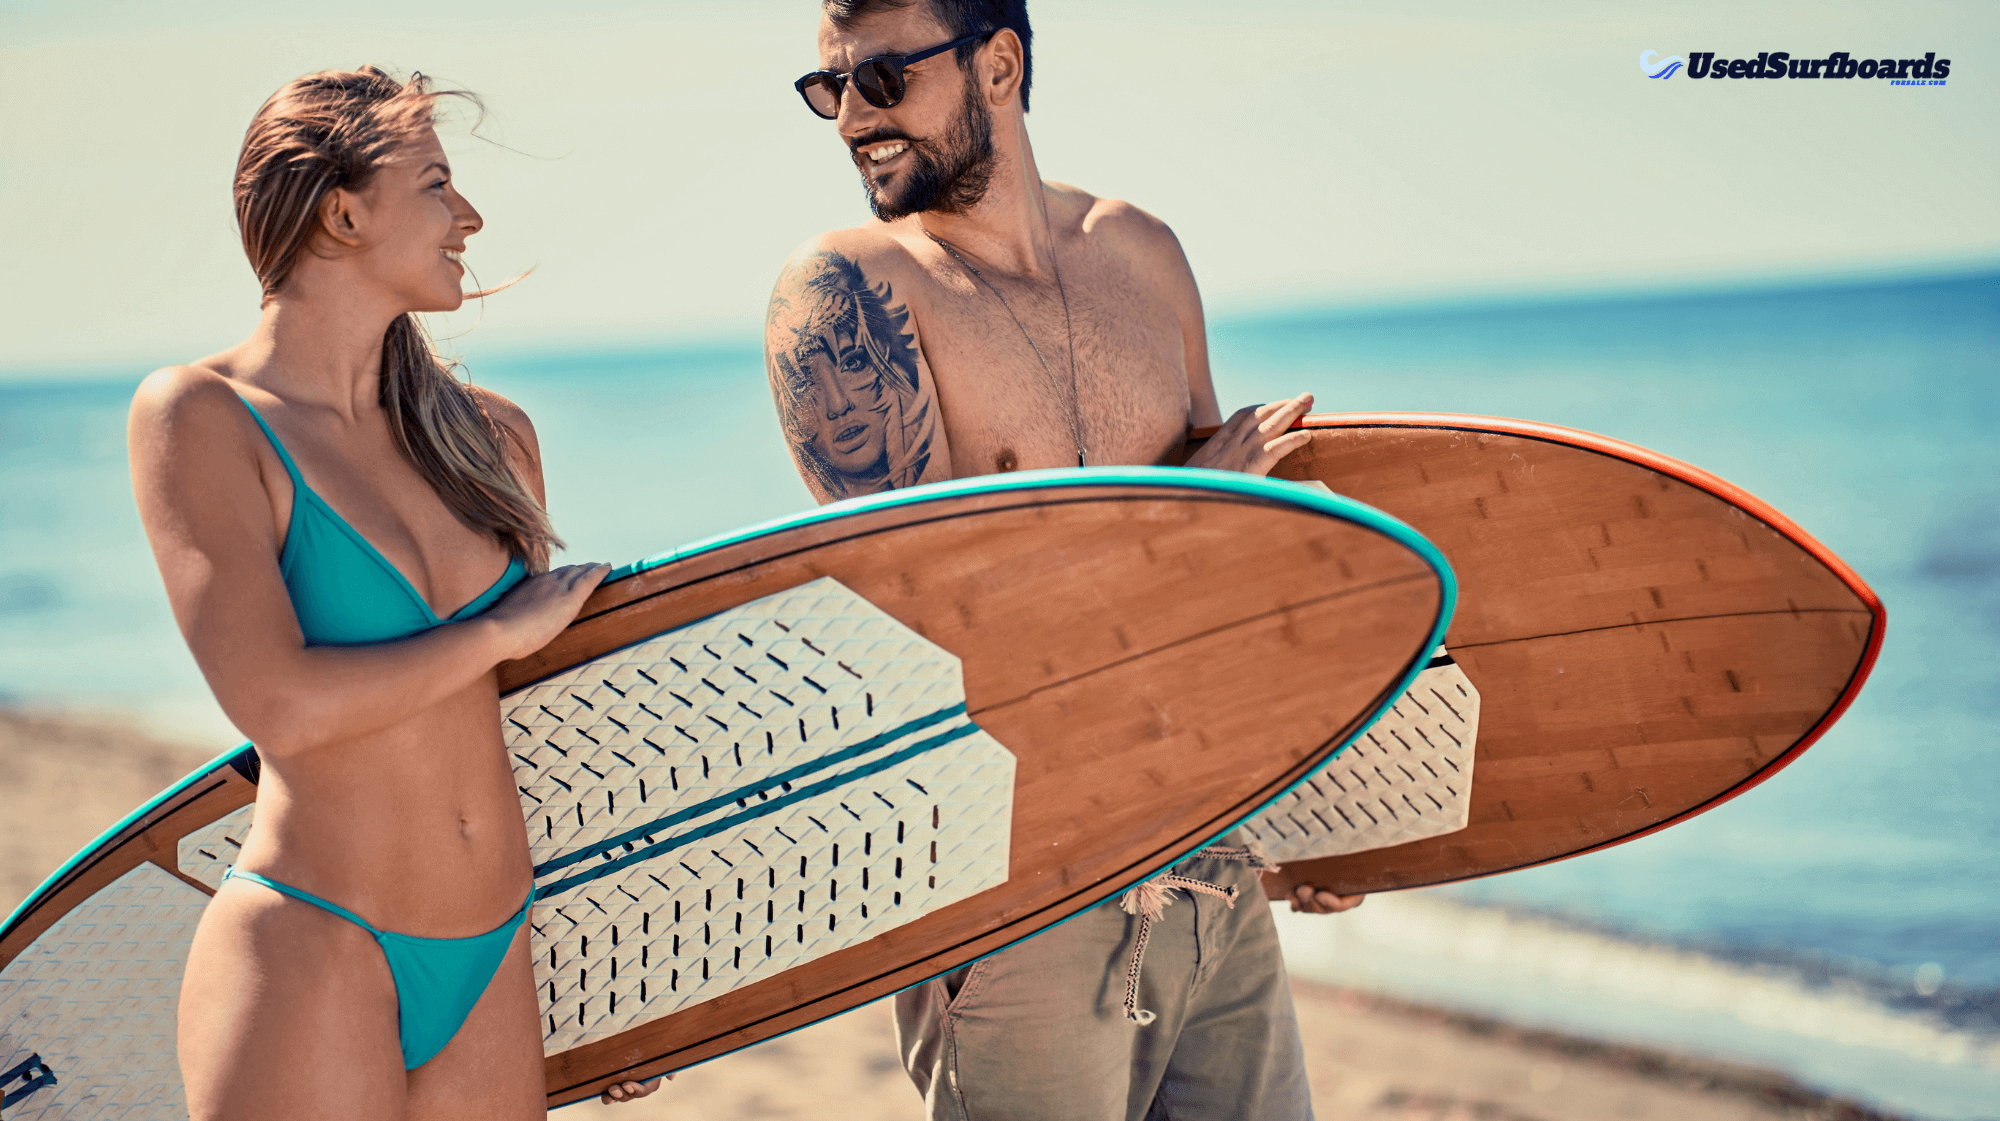 Odysea Surfboards: Ride the Waves with Style and Comfort